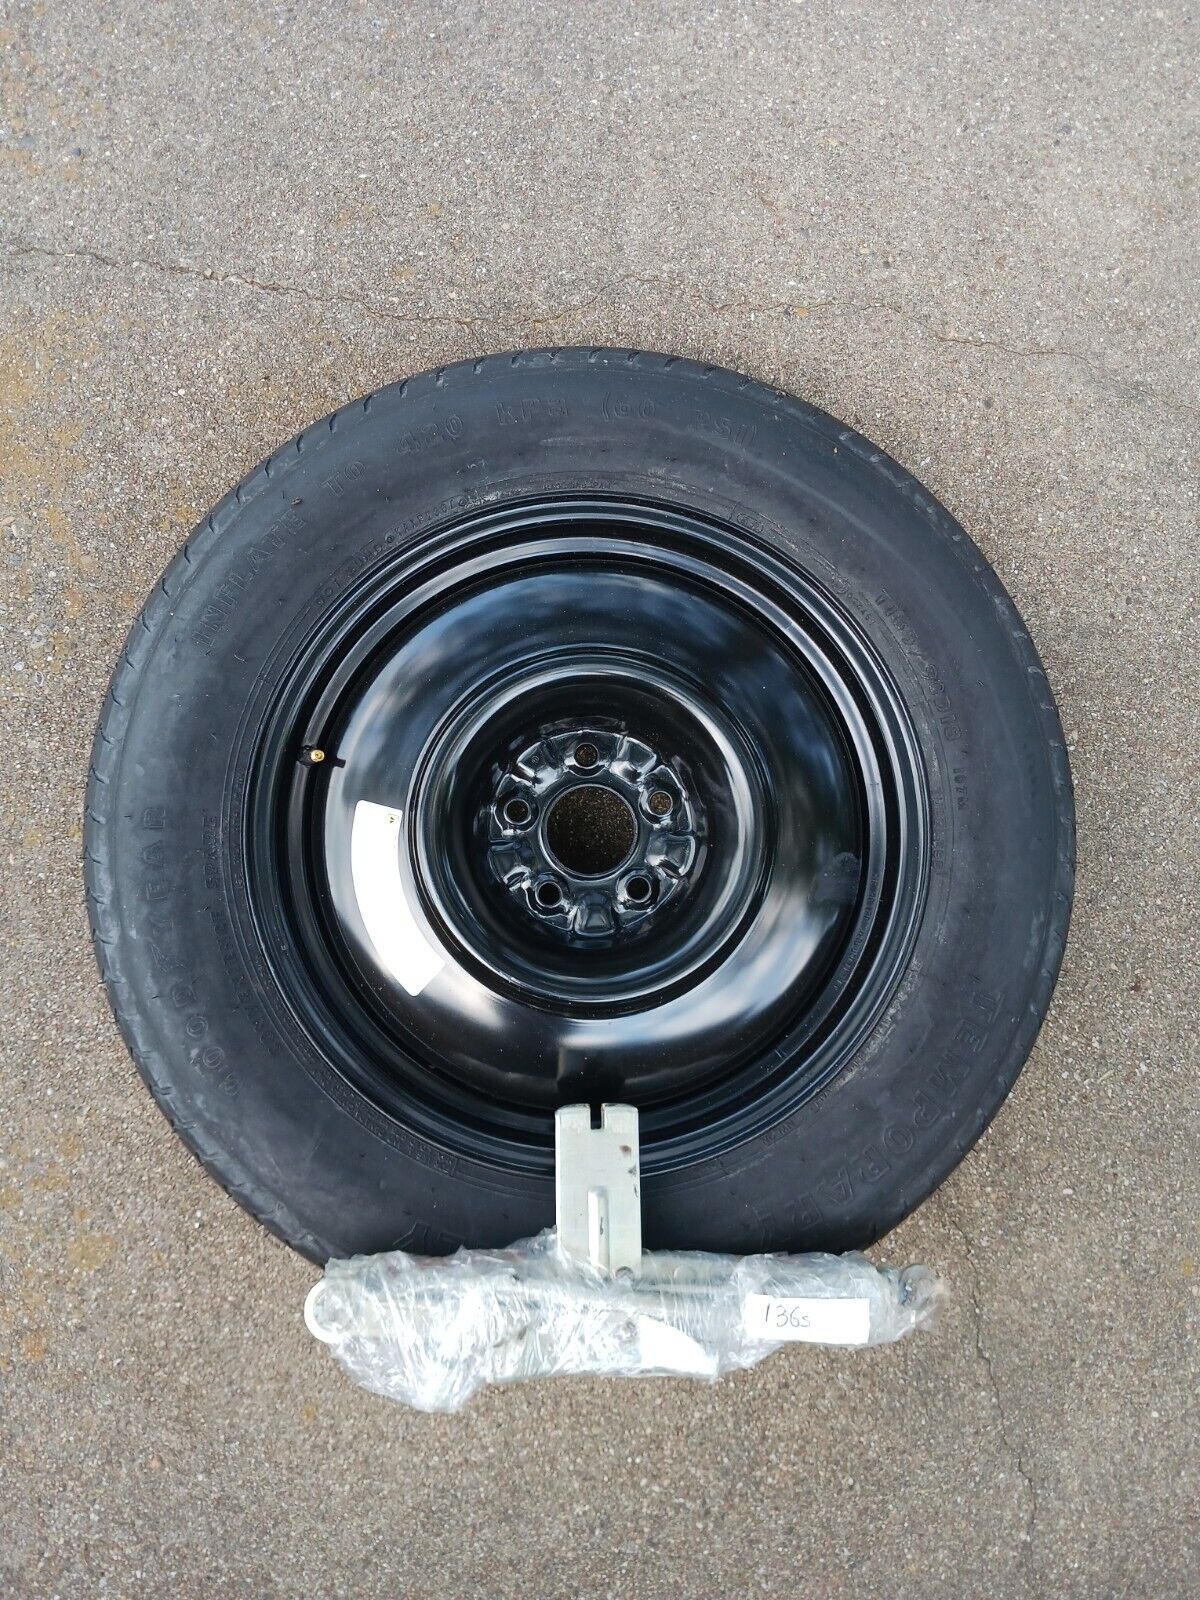 NEW 2003-2014 Nissan Murano compact spare tire with hack kit OEM